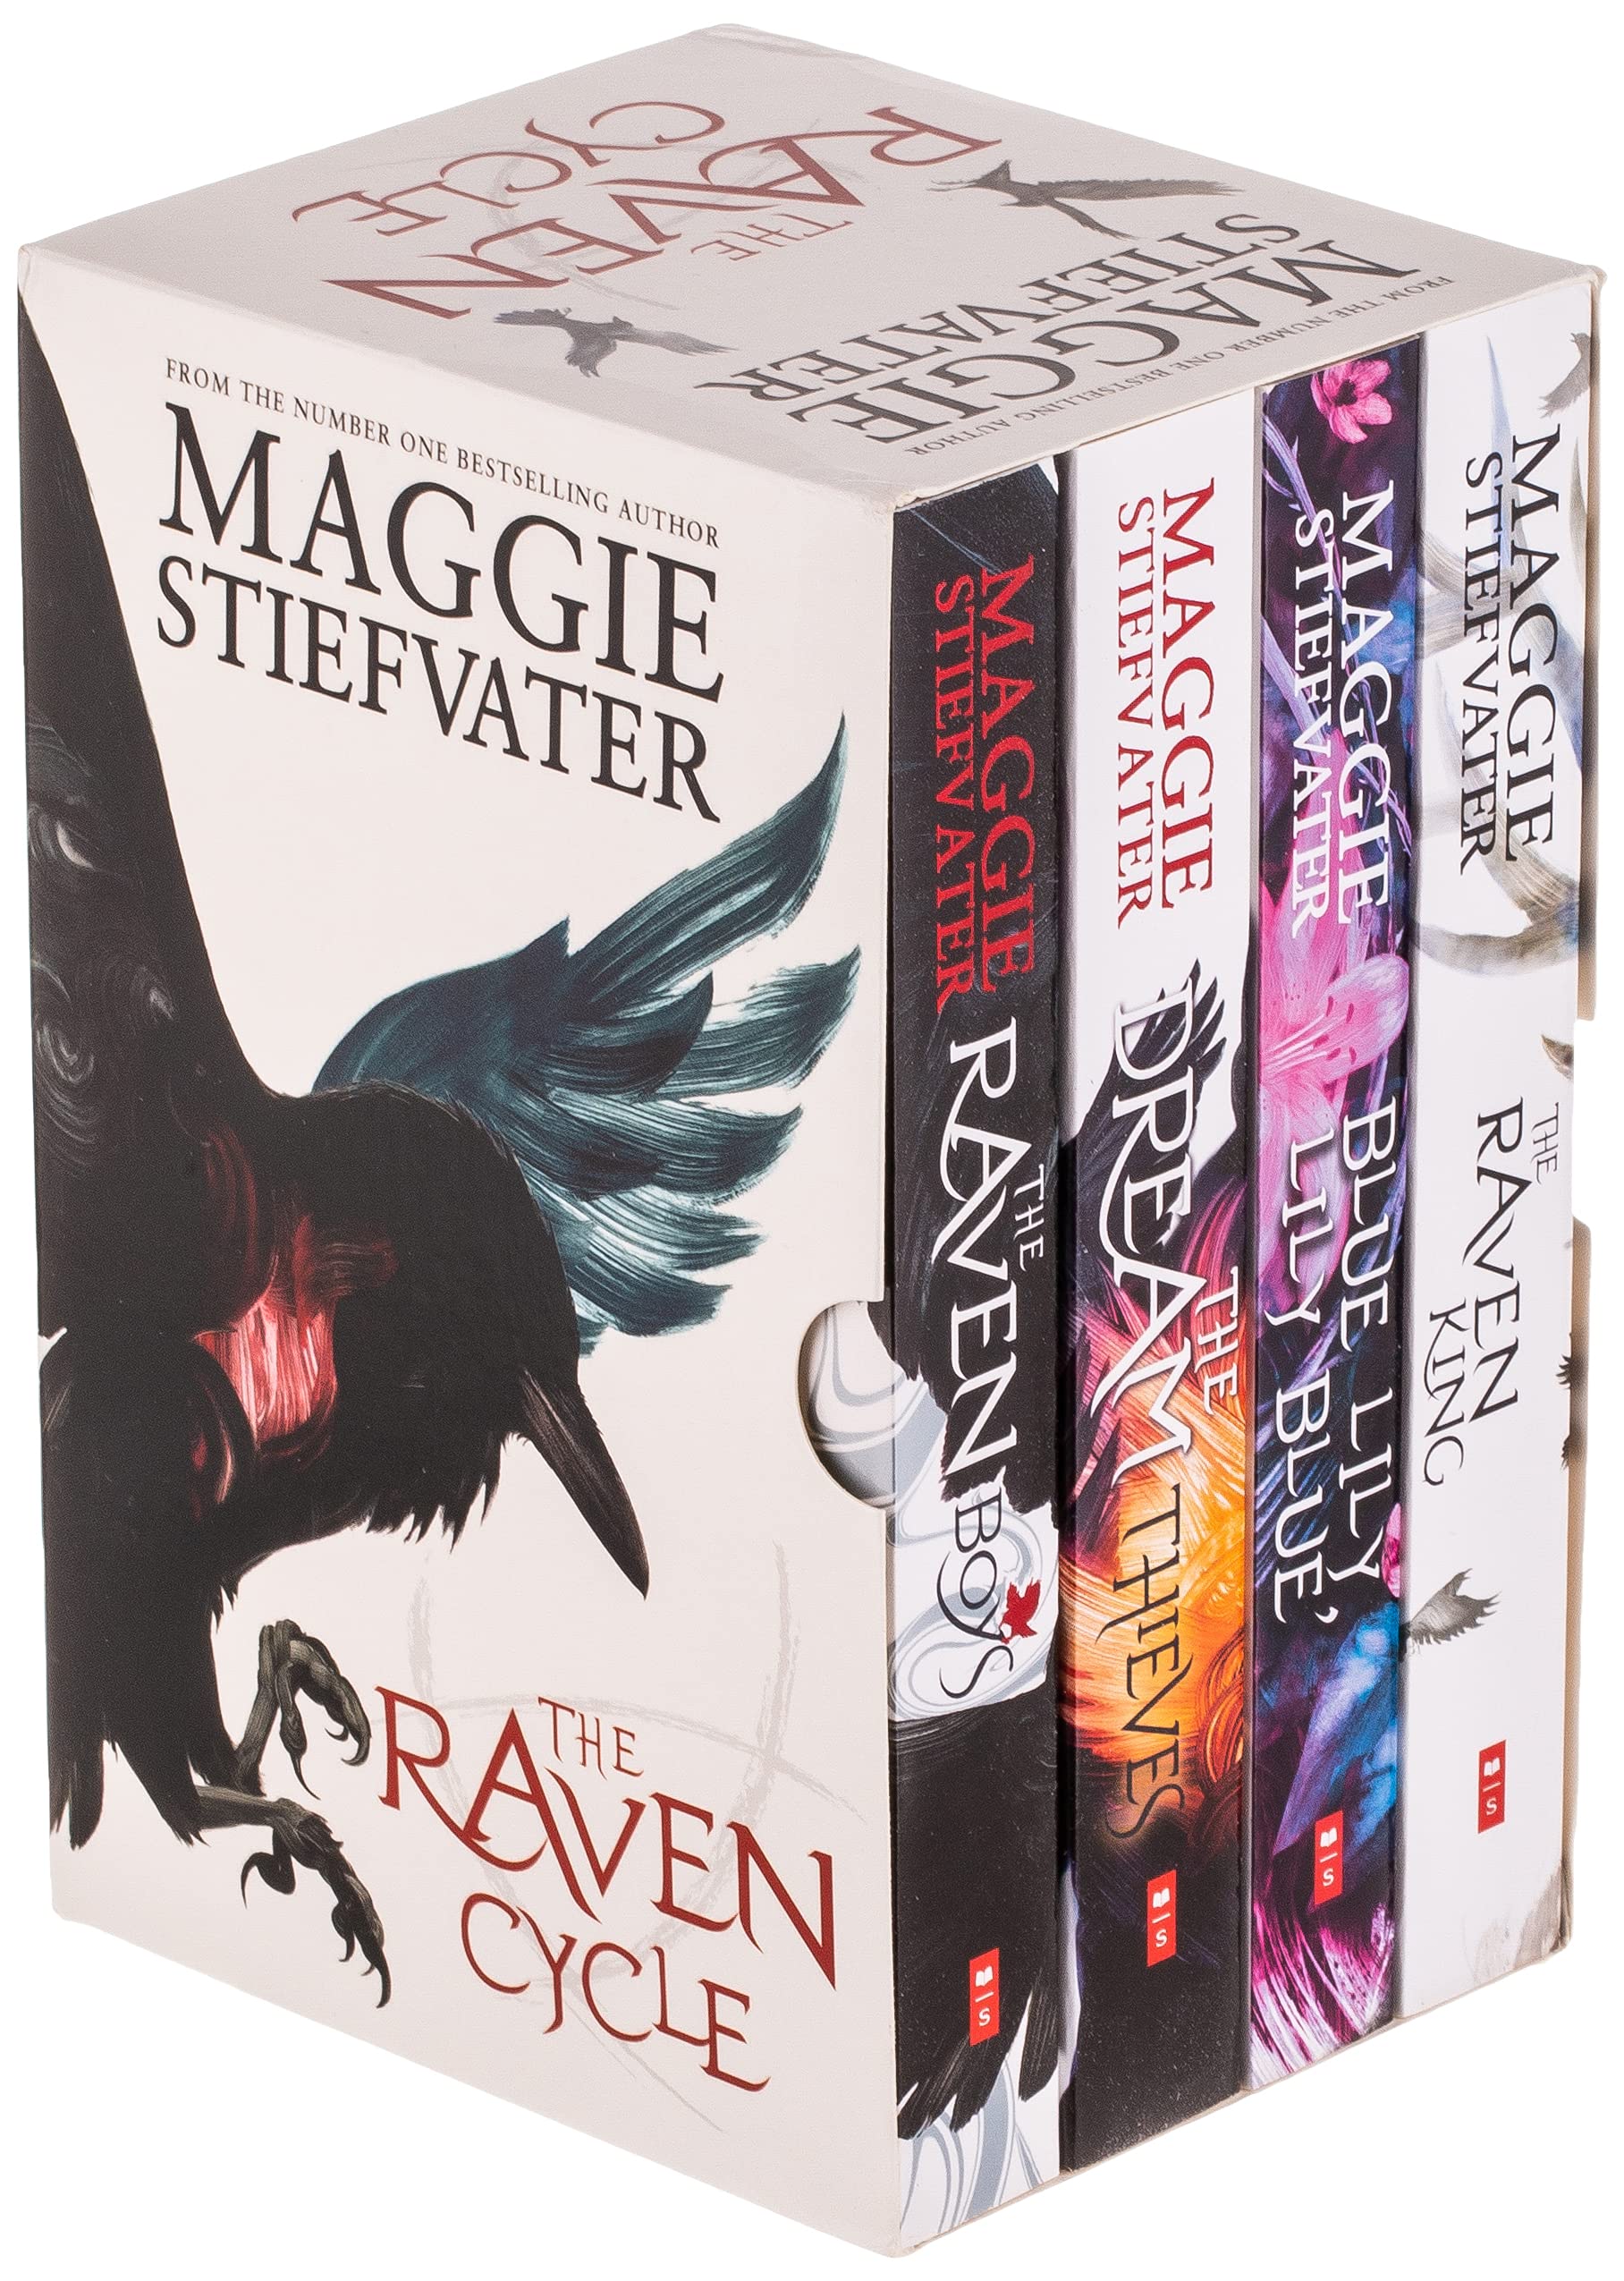 The Raven Cycle Series 4 Books Collection Box Set By Maggie Stiefvater The Raven King Blue Lily Lily Blue The Dream Thieves The Raven Boys